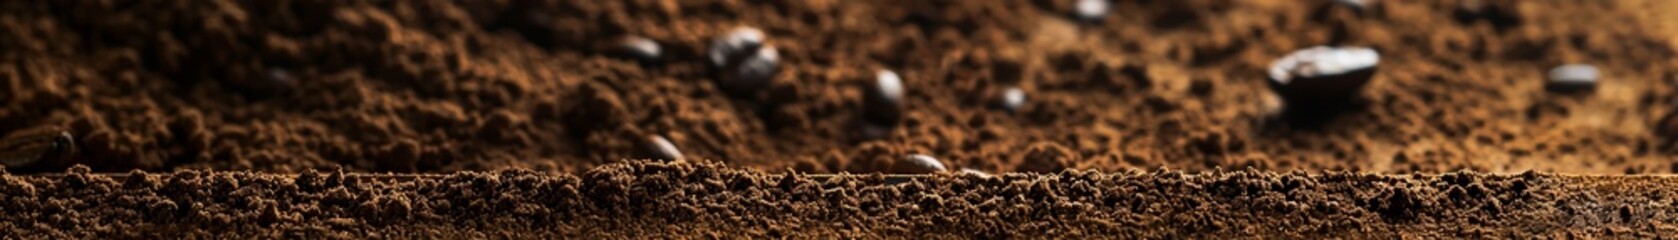 Freshly ground coffee beans close up details of texture and aroma